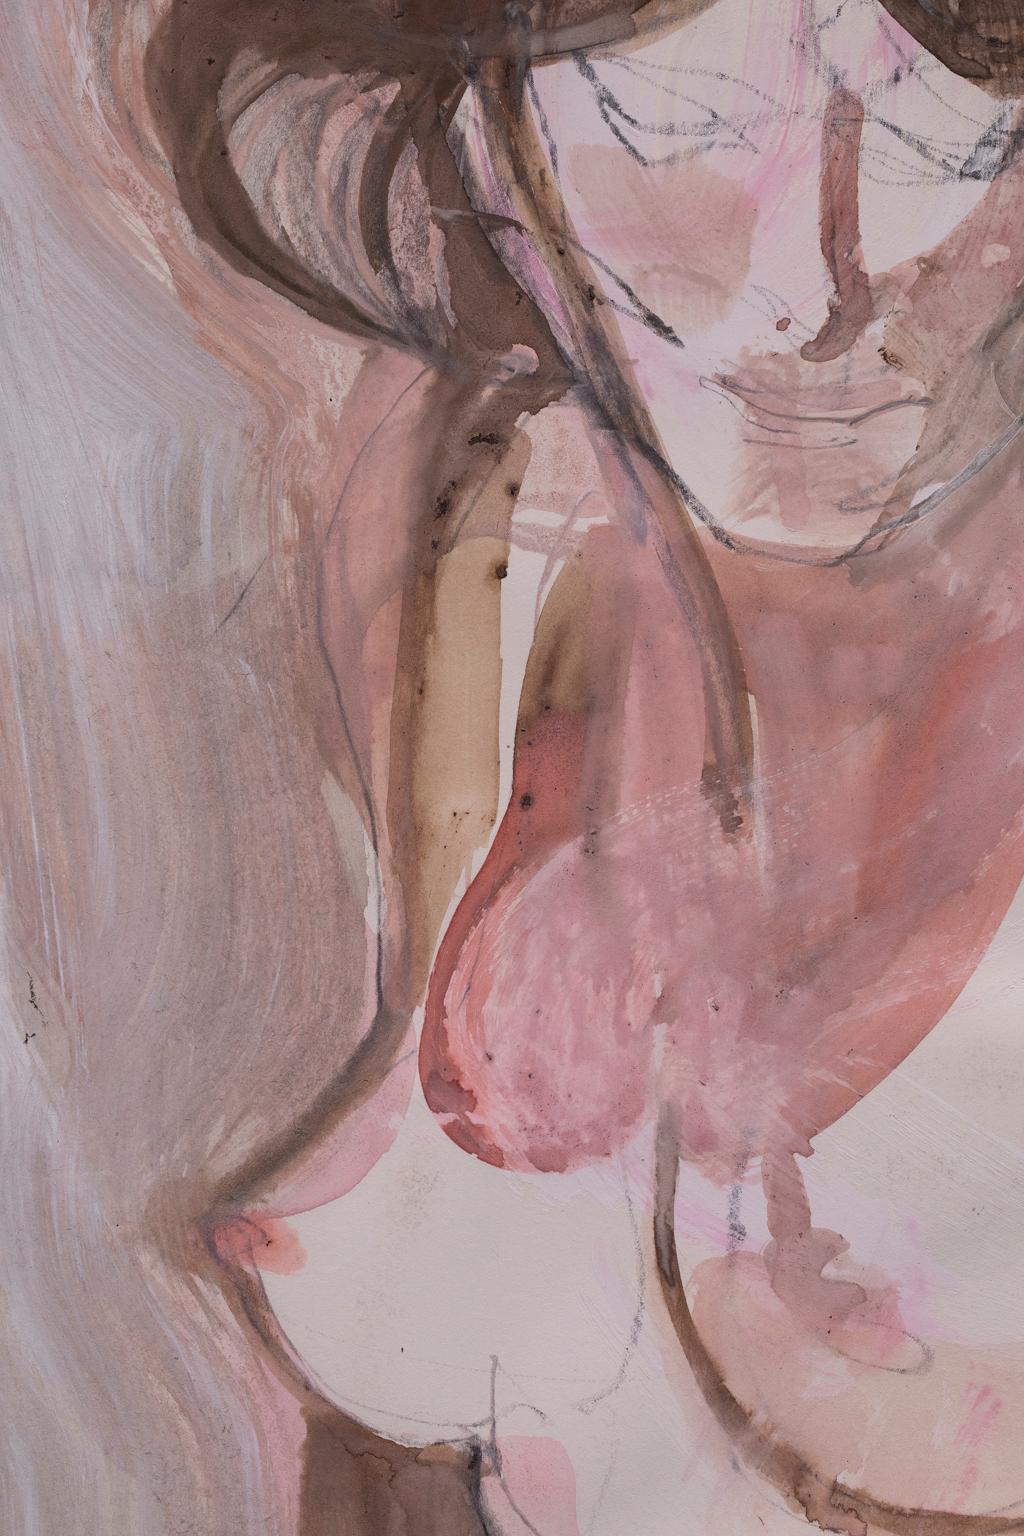 This mixed media on paper from the seminal artist Artis Lane is one of the many model paintings from her long and illustrious career. The subject is a nude woman sitting in pose. Artis Lane, in her many nudes, chose to depict a diversity of bodies,